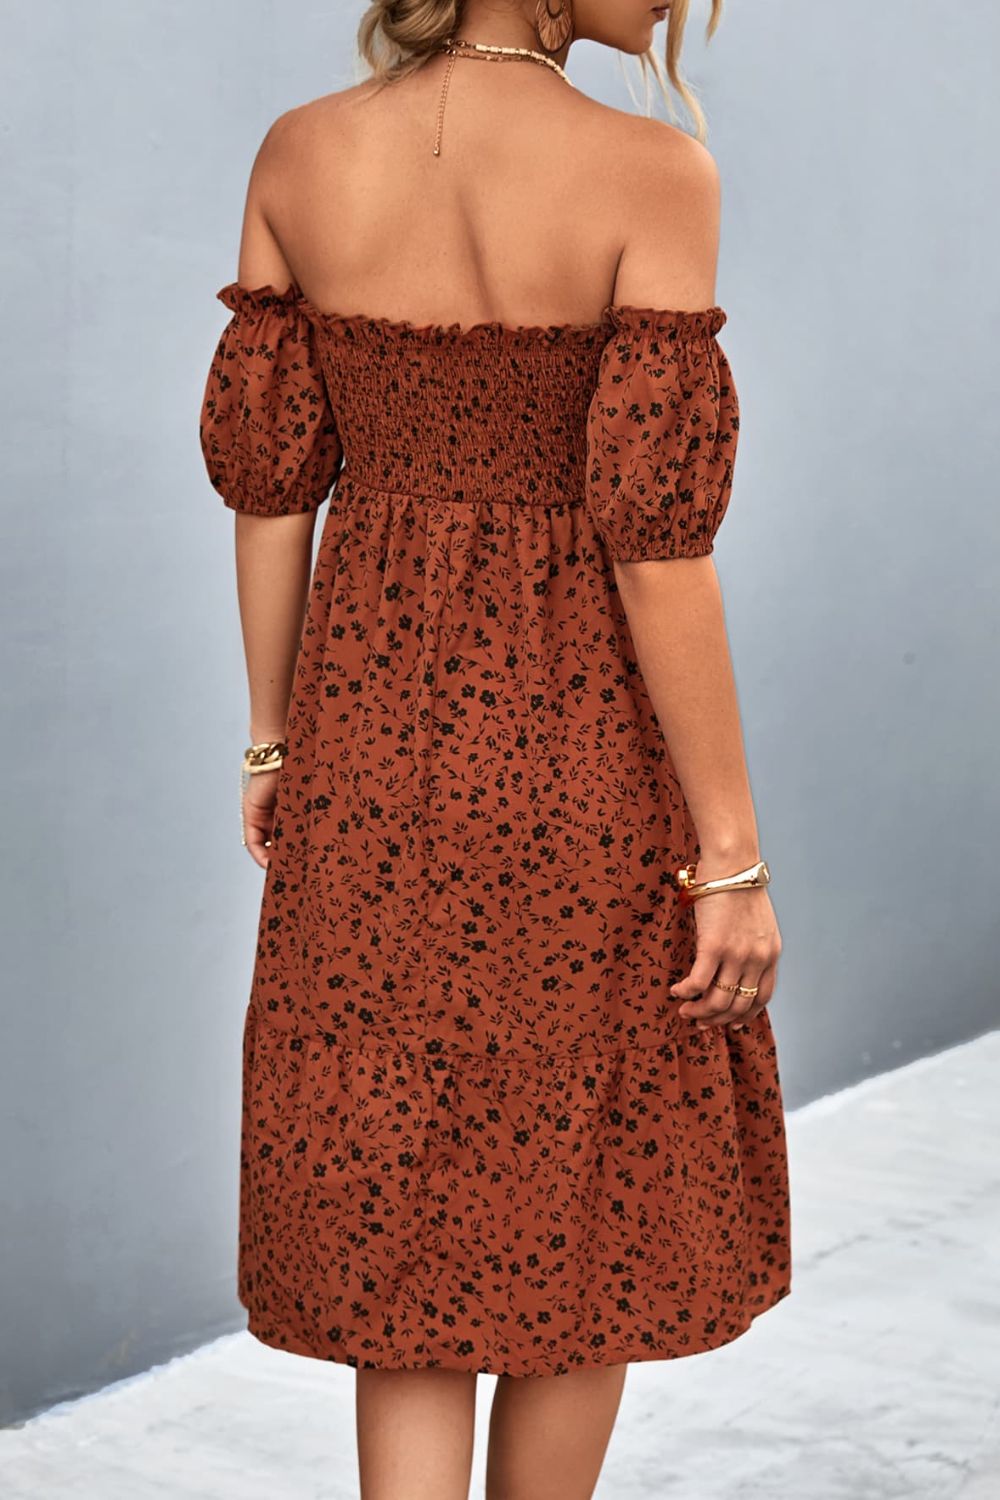 Smocked Off-Shoulder Dress: A stylish dress featuring a smocked bodice and an off-shoulder neckline for a trendy and feminine look.